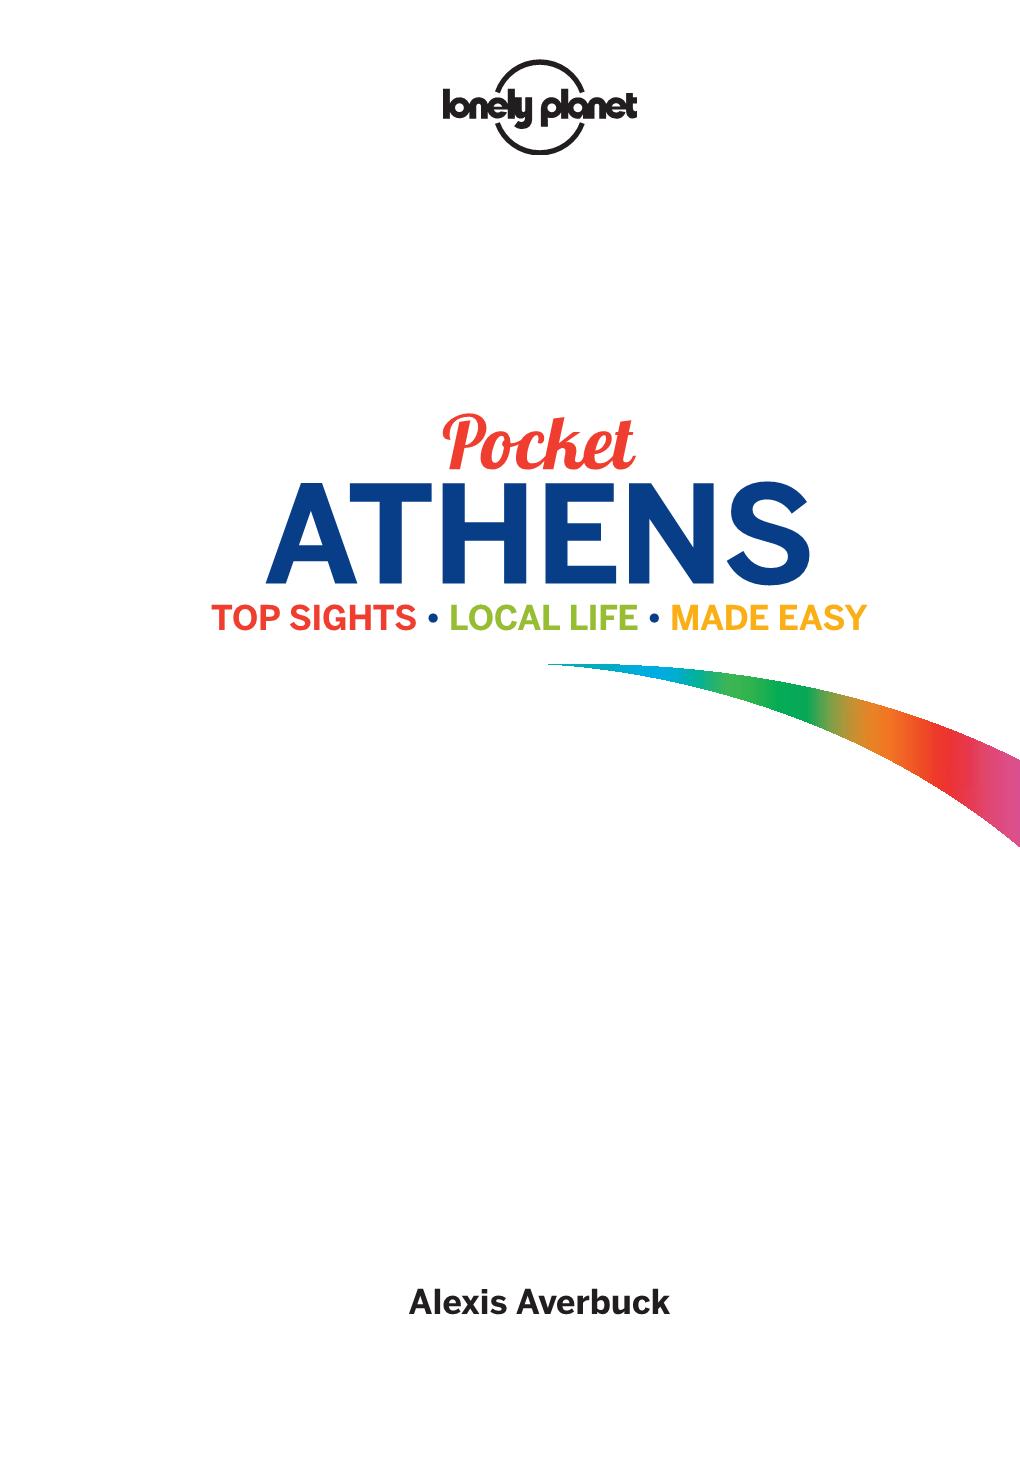 Athens Top Sights • Local Life • Made Easy